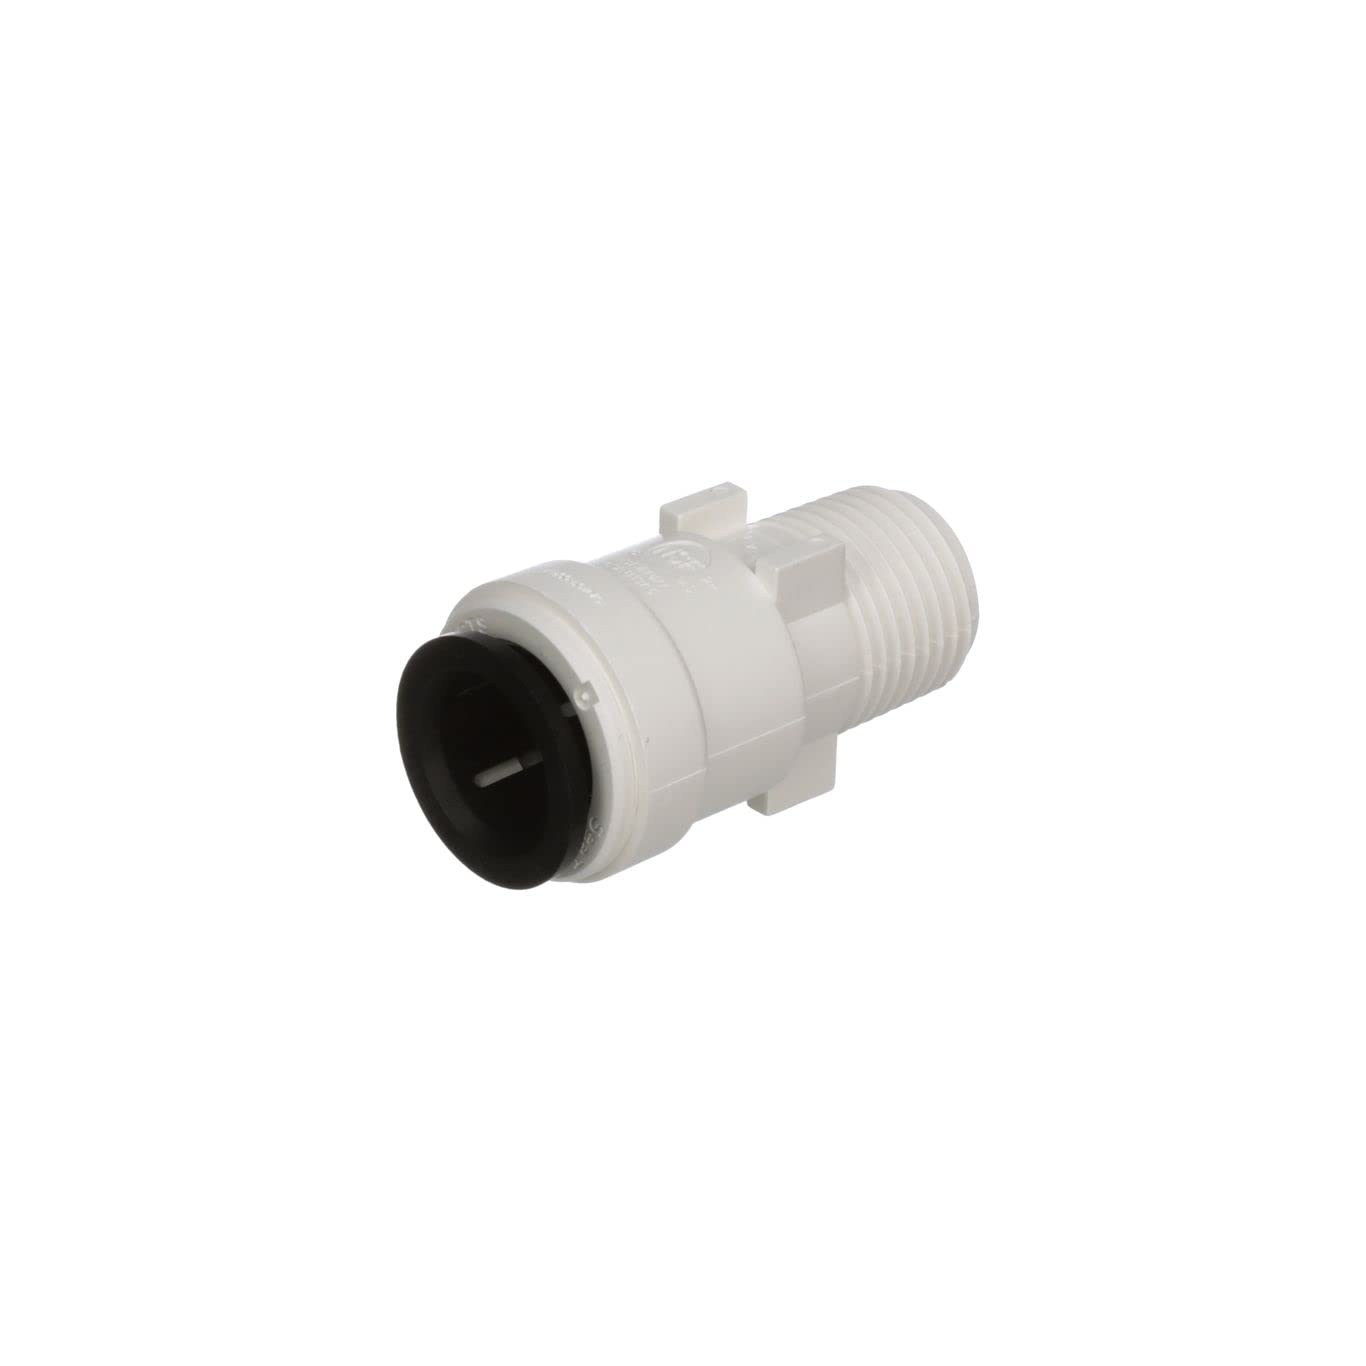 MALE CONNECTOR 3/8 CTS X 1/2 NPT